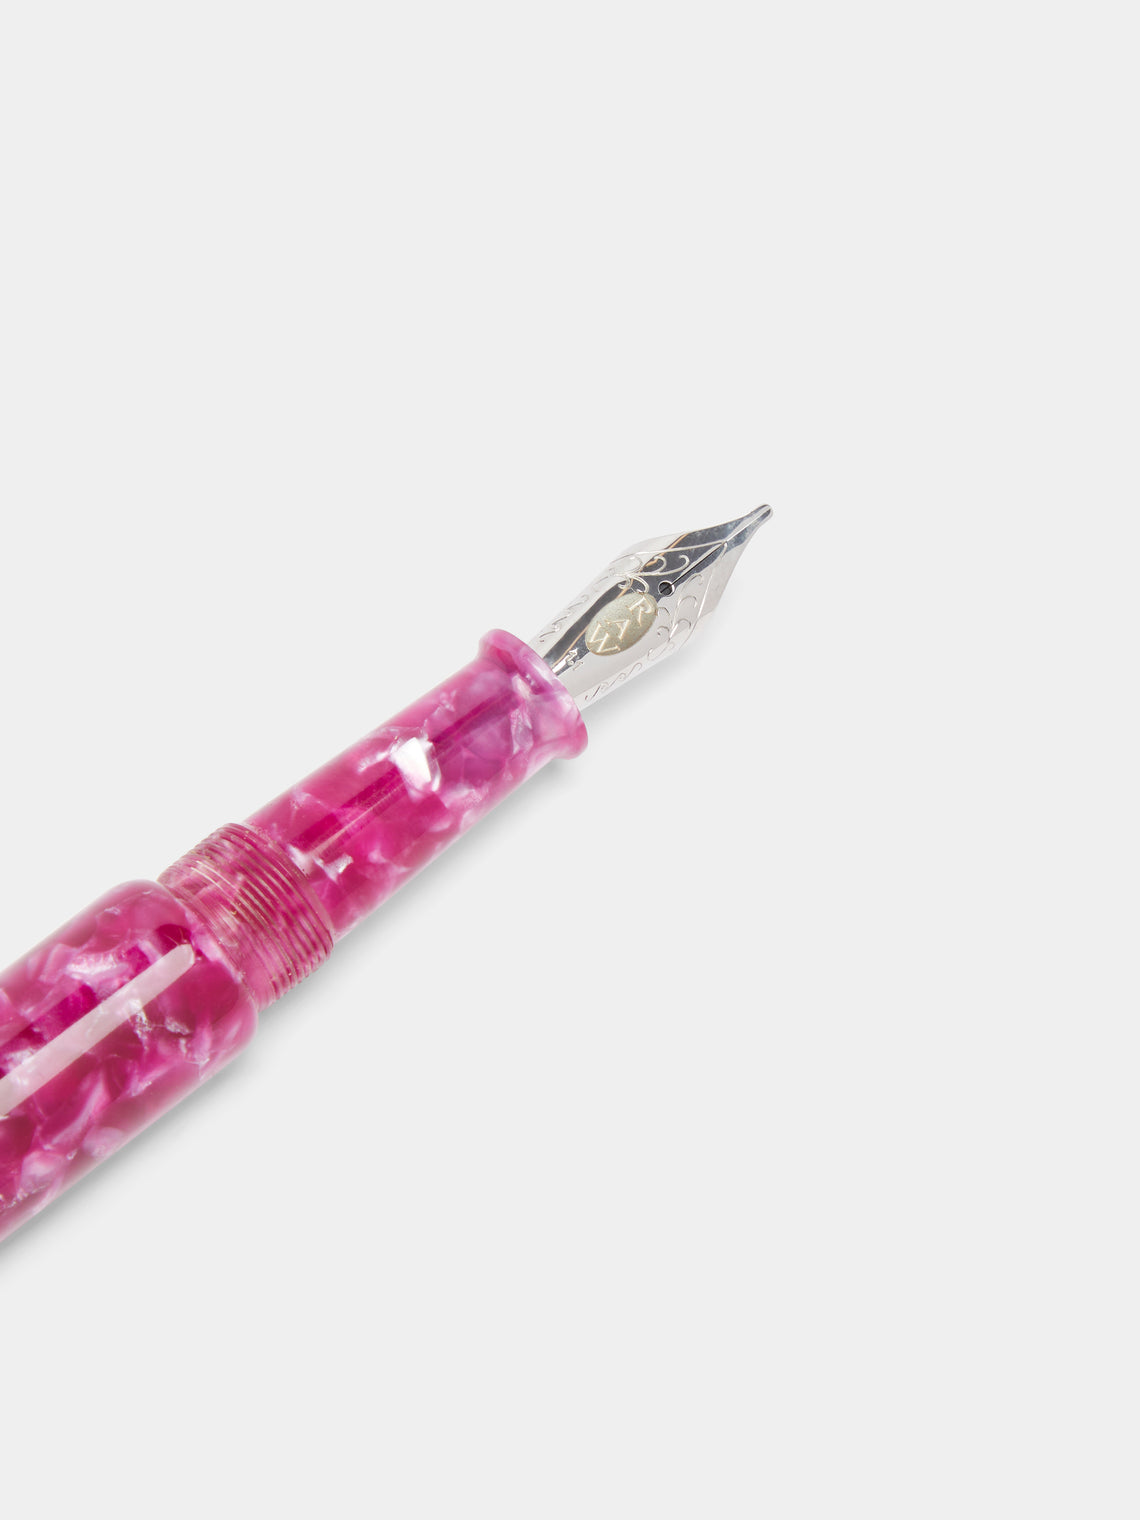 R A W - Resin Fountain Pen - Pink - ABASK